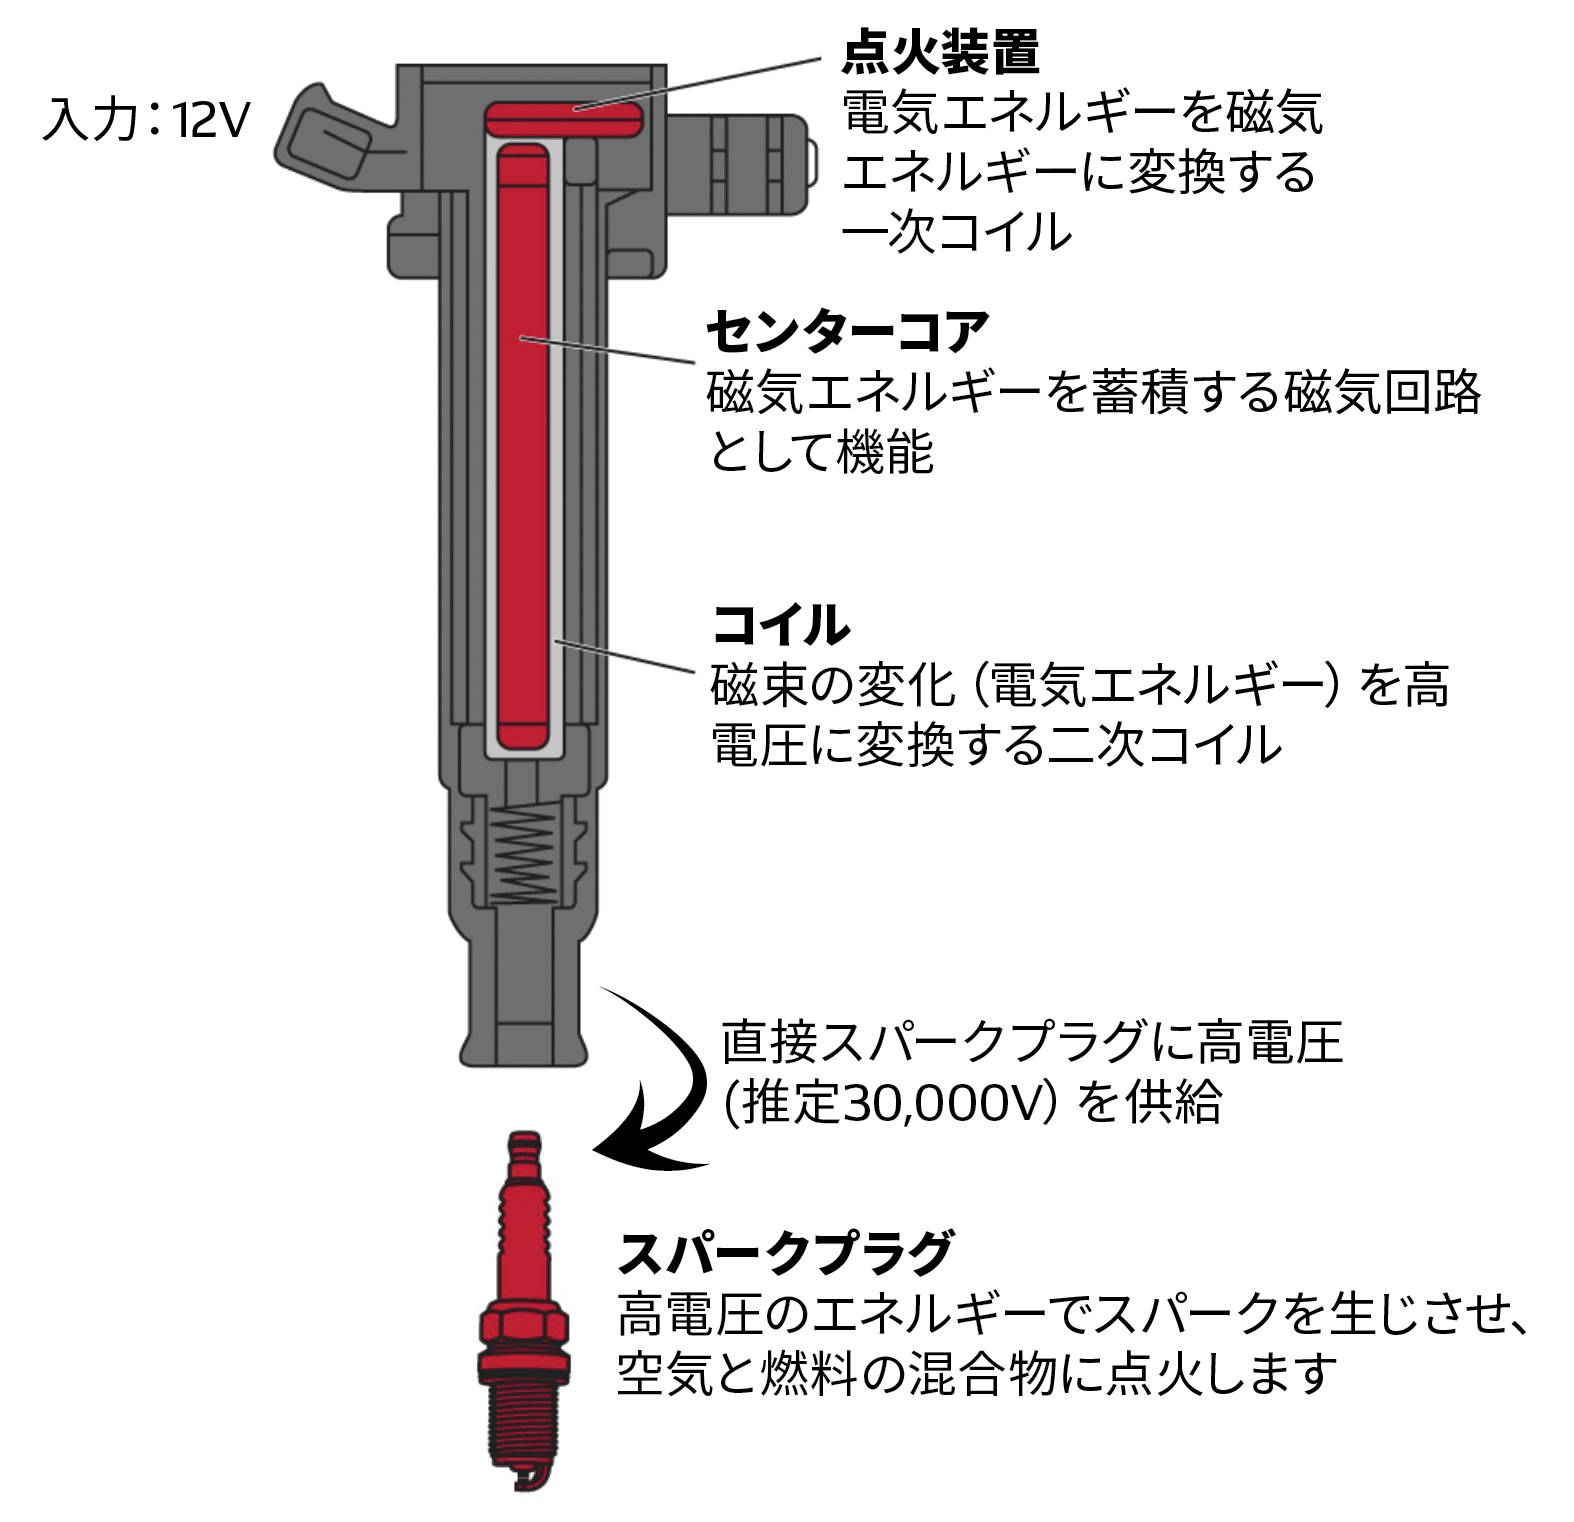 DENSO | PRODUCT INFORMATION